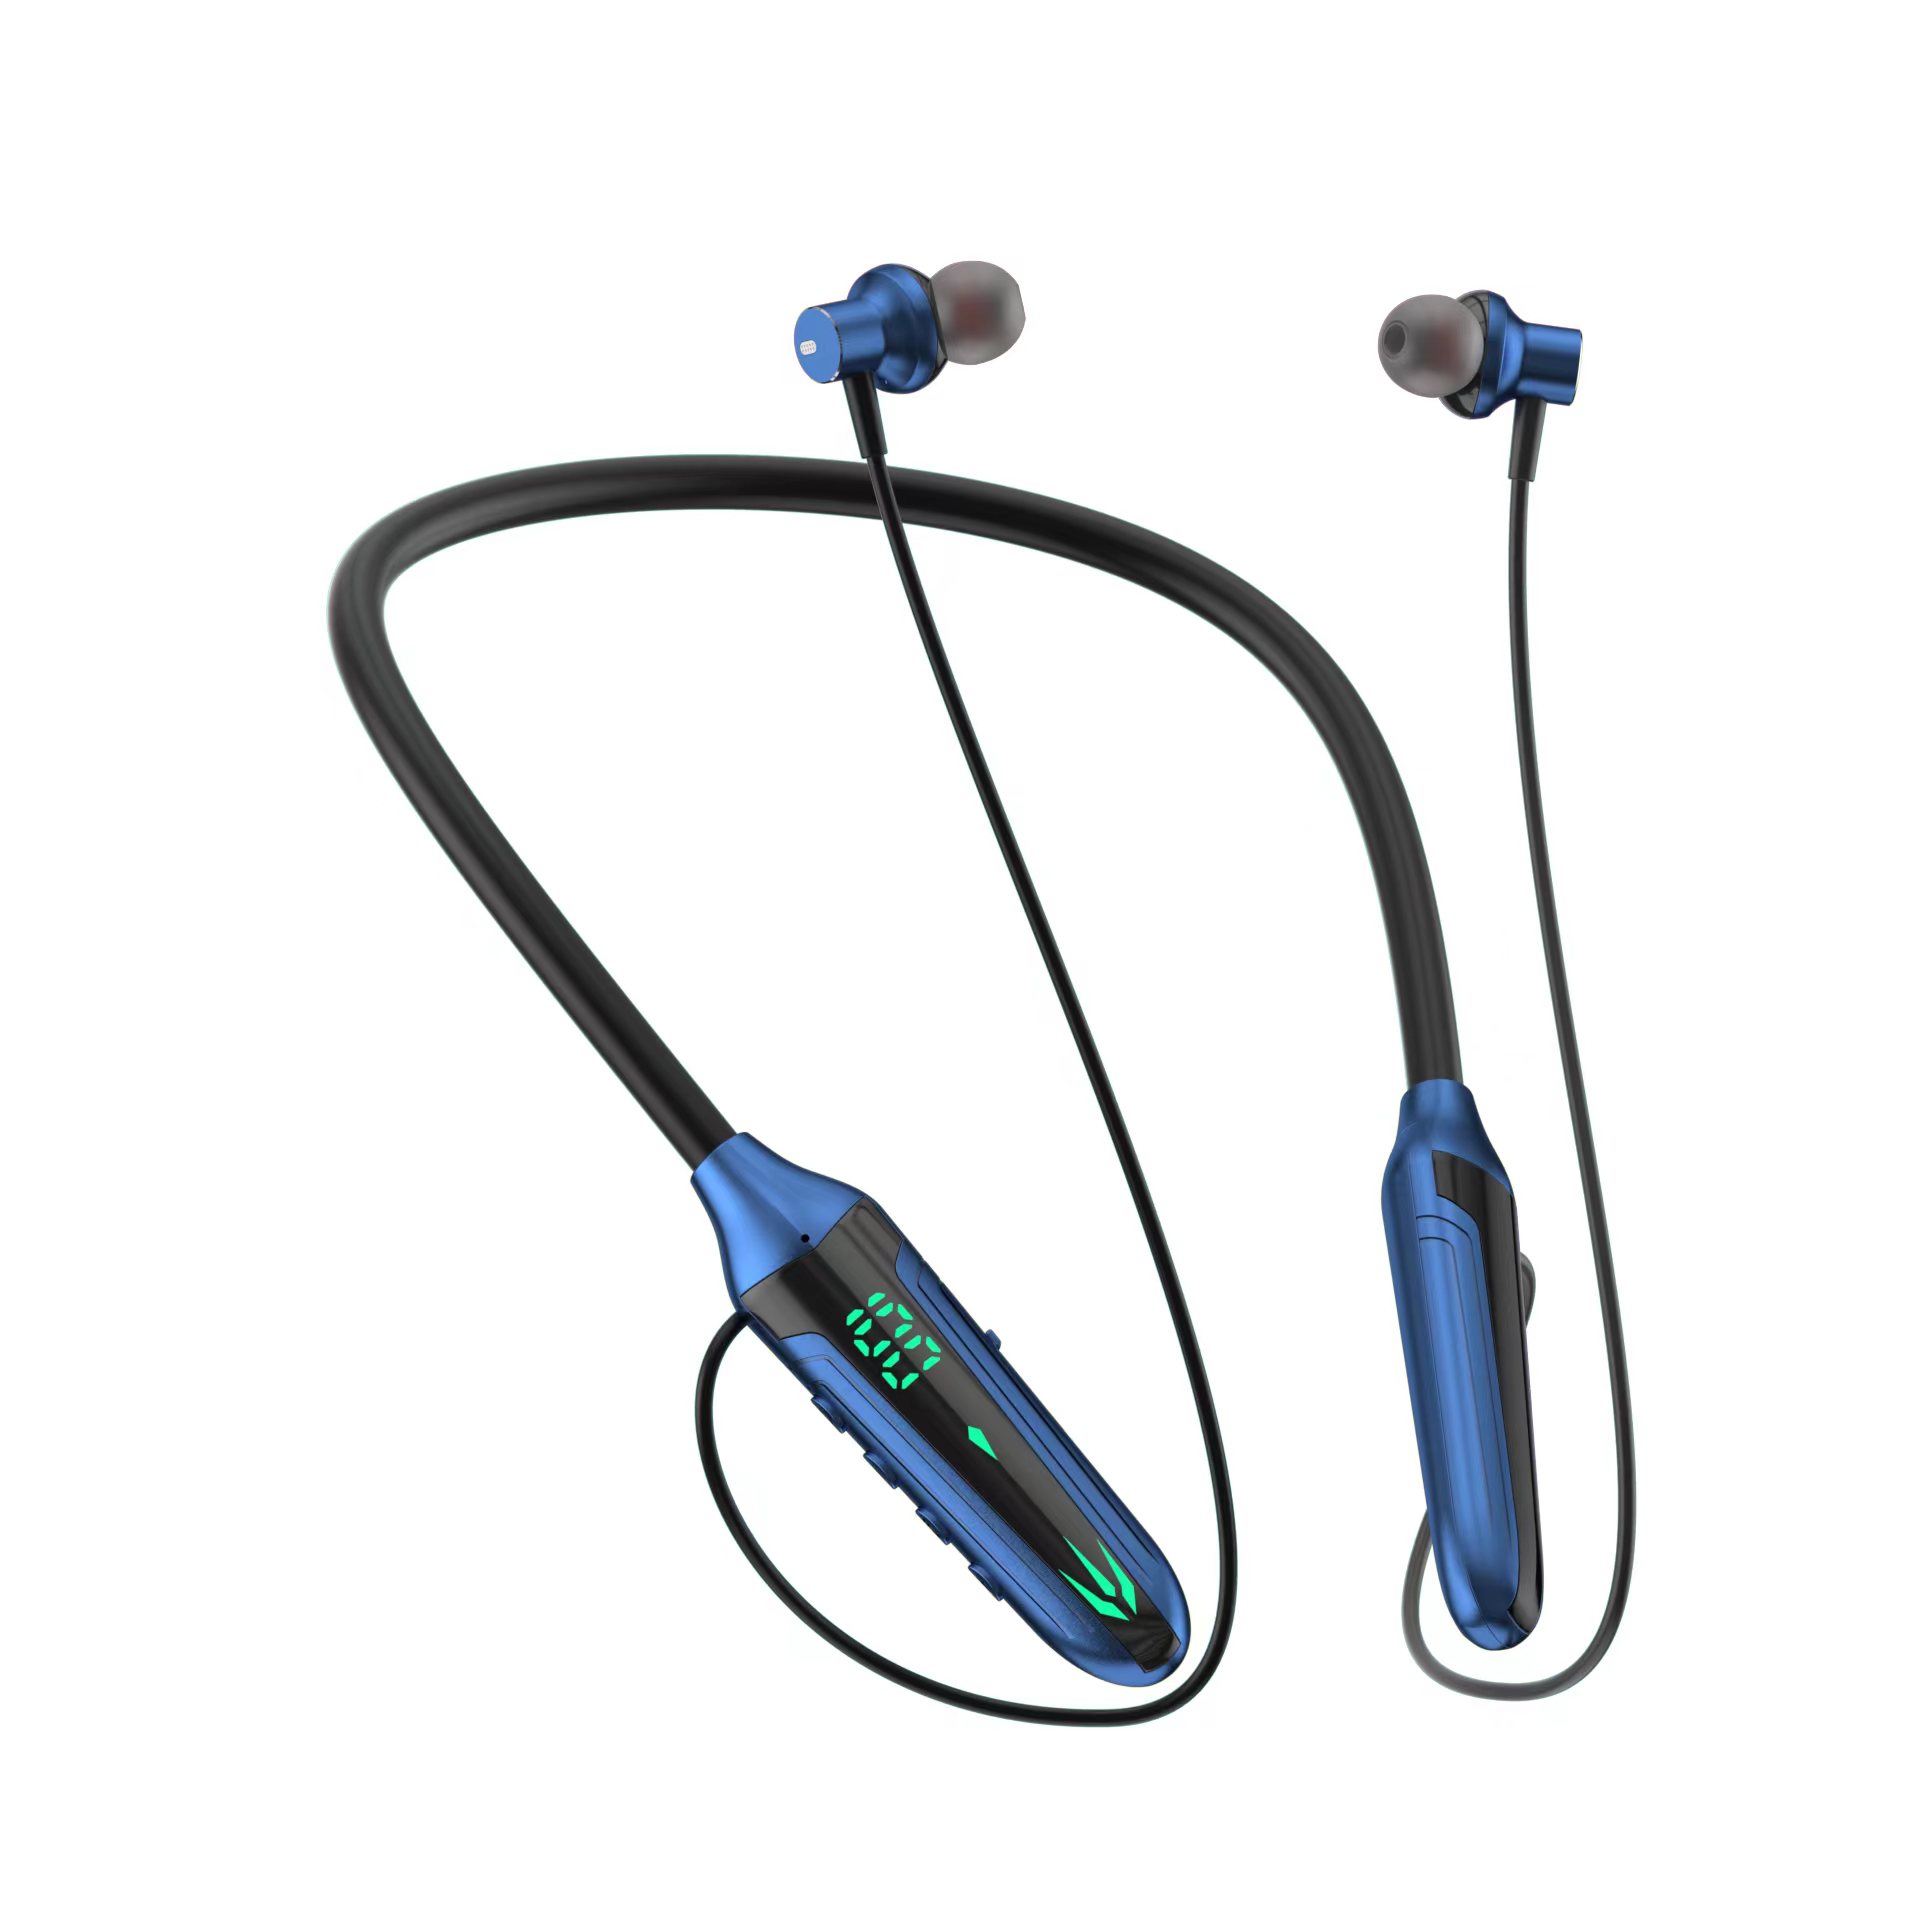 BT neckband earbuds with lights for gaming and sports F23